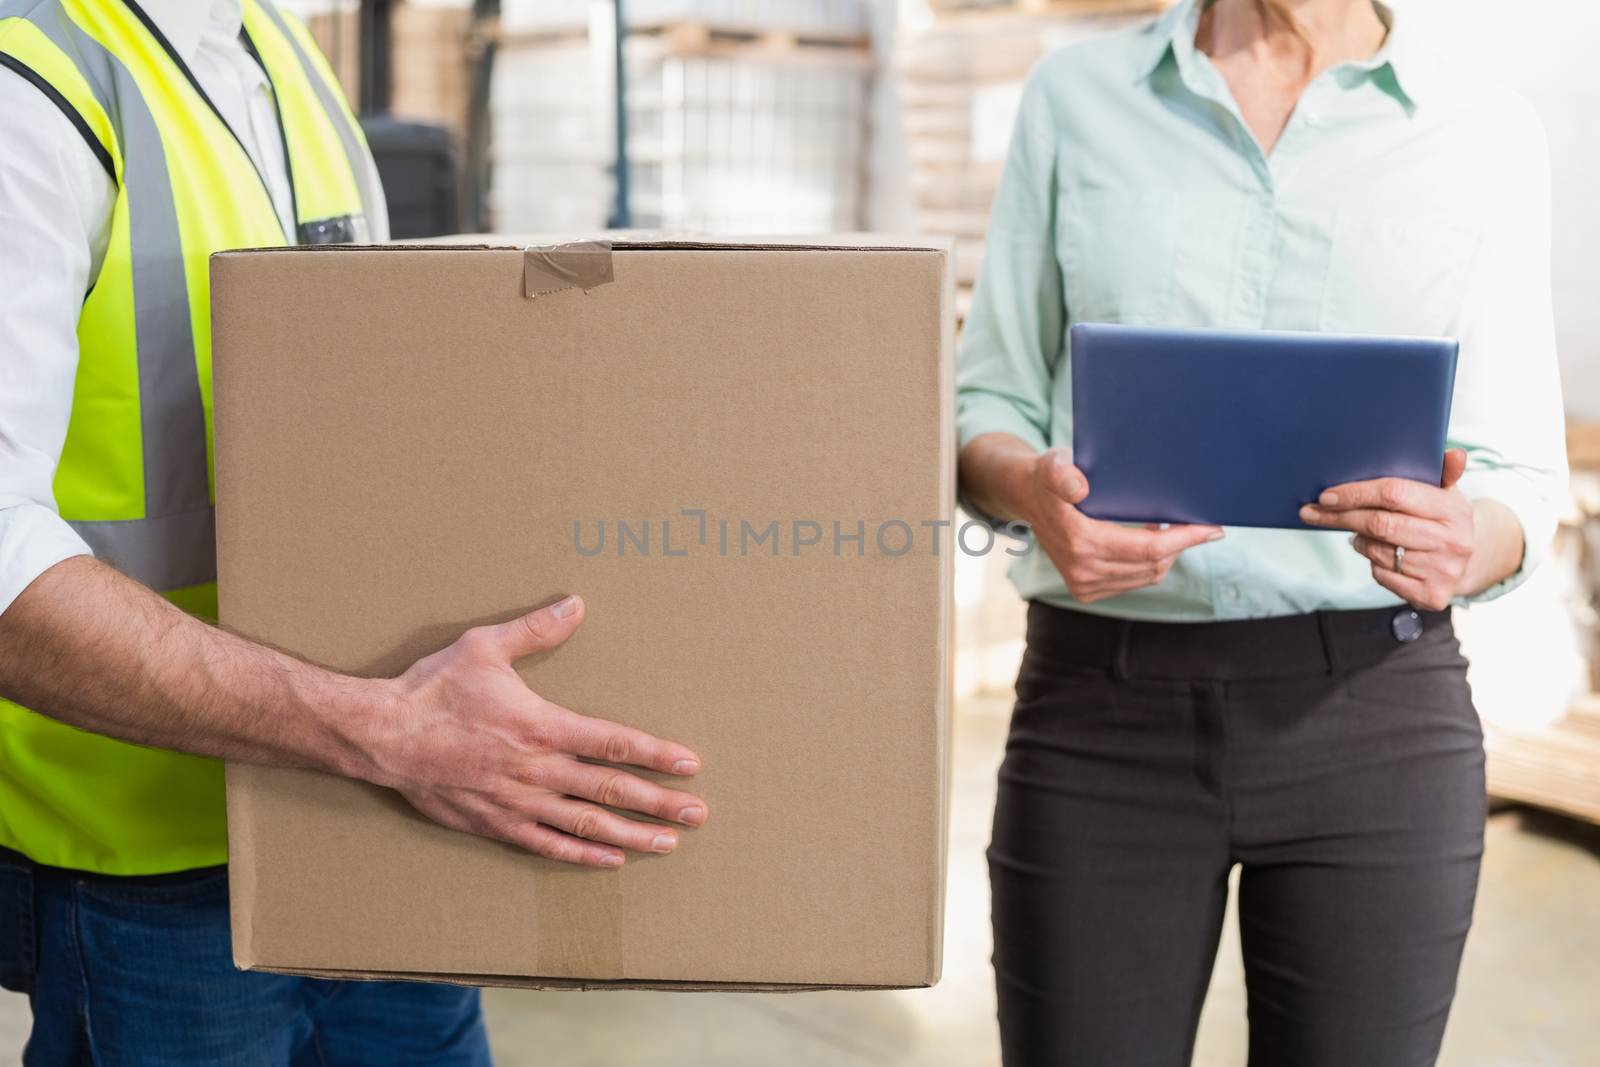 Worker carrying box with manager holding tablet pc in a large warehouse